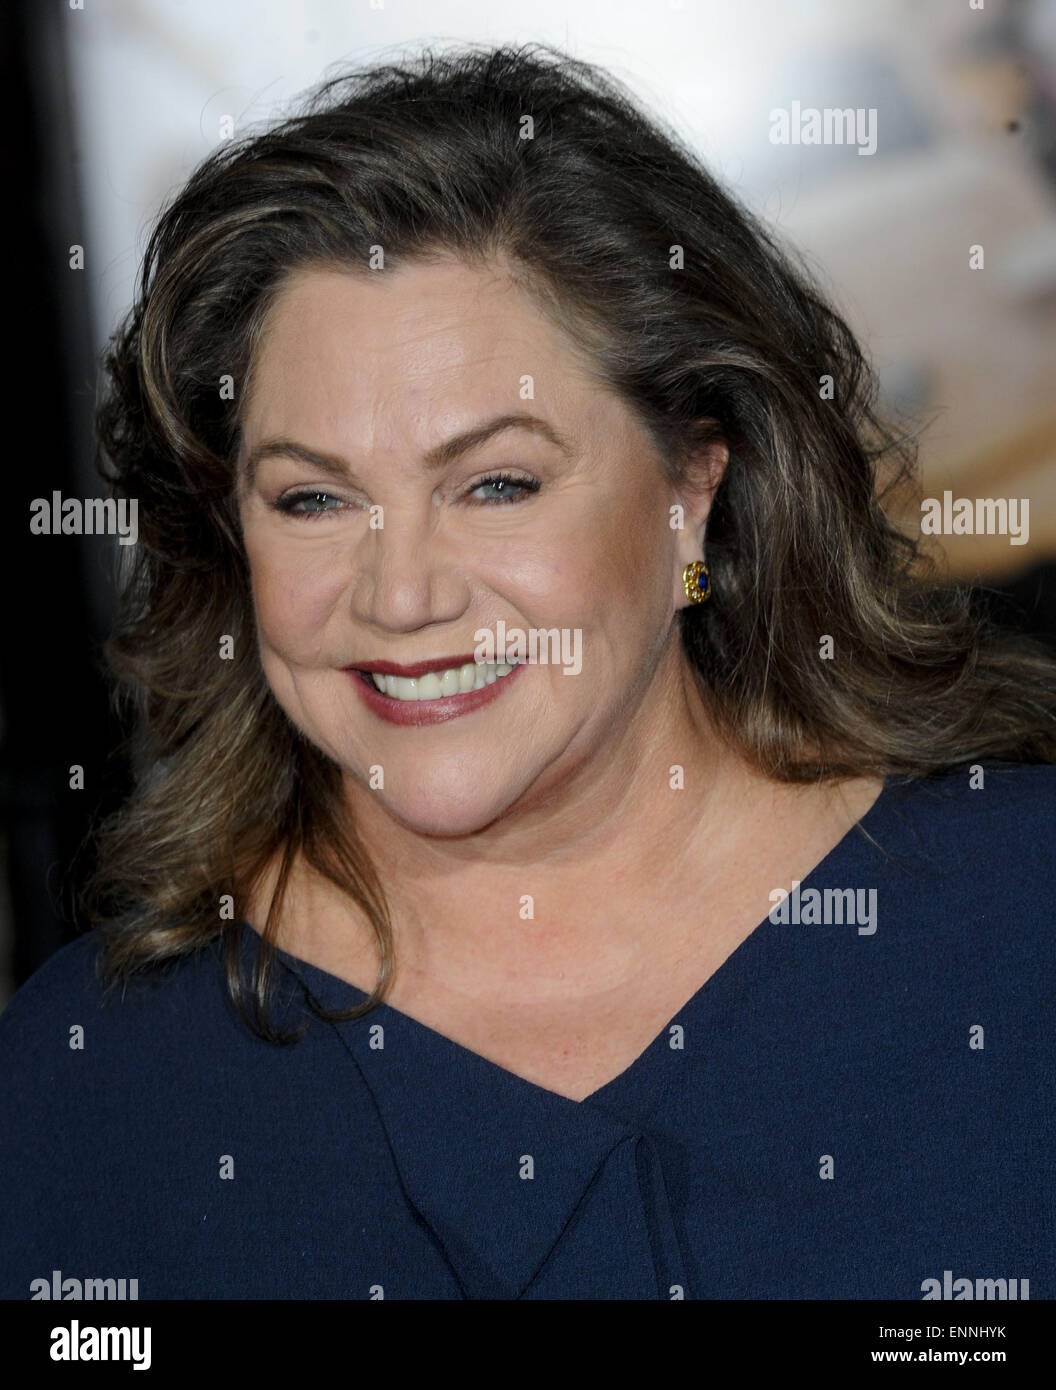 L.A. premiere of 'Dumb and Dumber' held at The Regency Village Theatre in Westwood - Red Carpet Arrivals  Featuring: Kathleen Turner Where: Los Angeles, California, United States When: 03 Nov 2014 Stock Photo